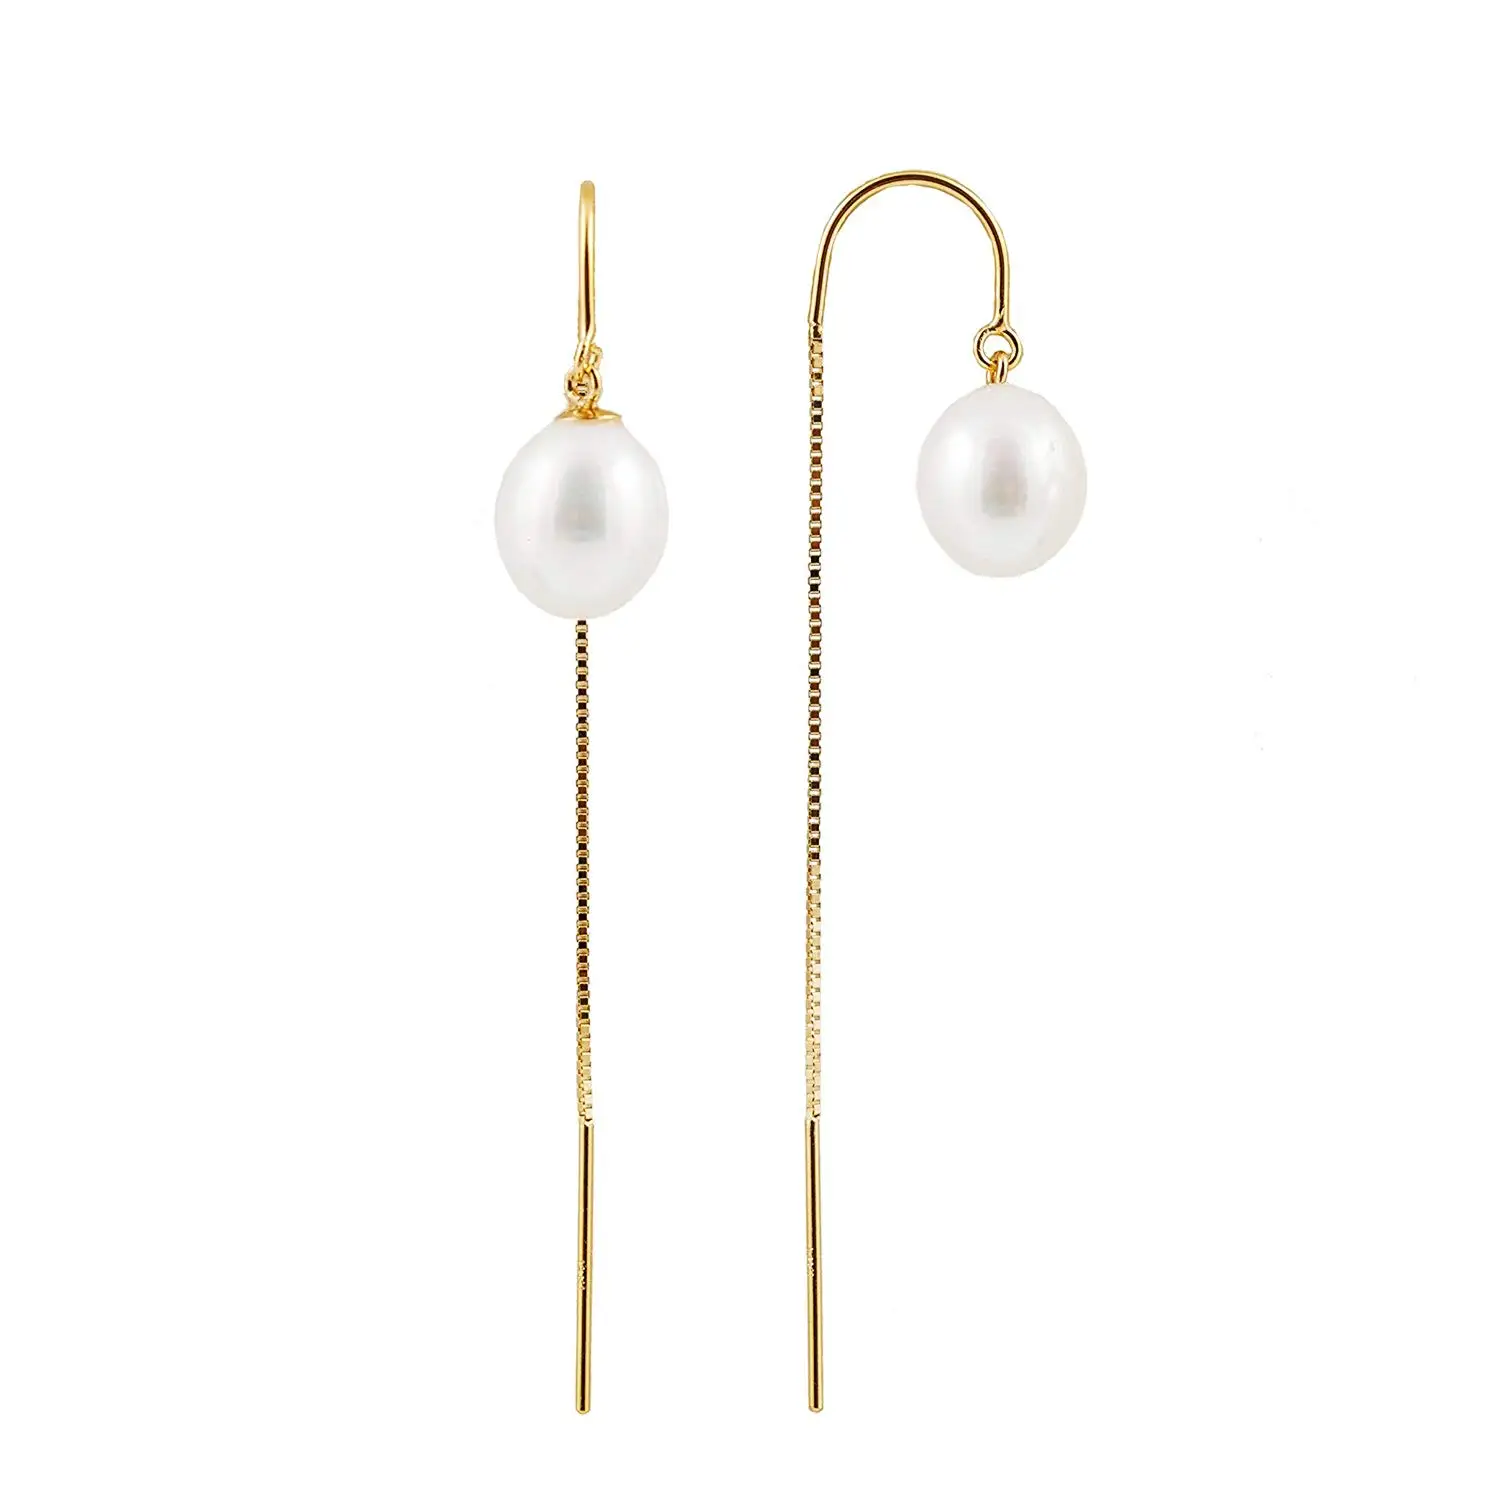 Handpicked AAA 5.5-6mm White Rice Freshwater Cultured Pearls in 14K Yellow Gold Dangling Hoop French Hook Earrings